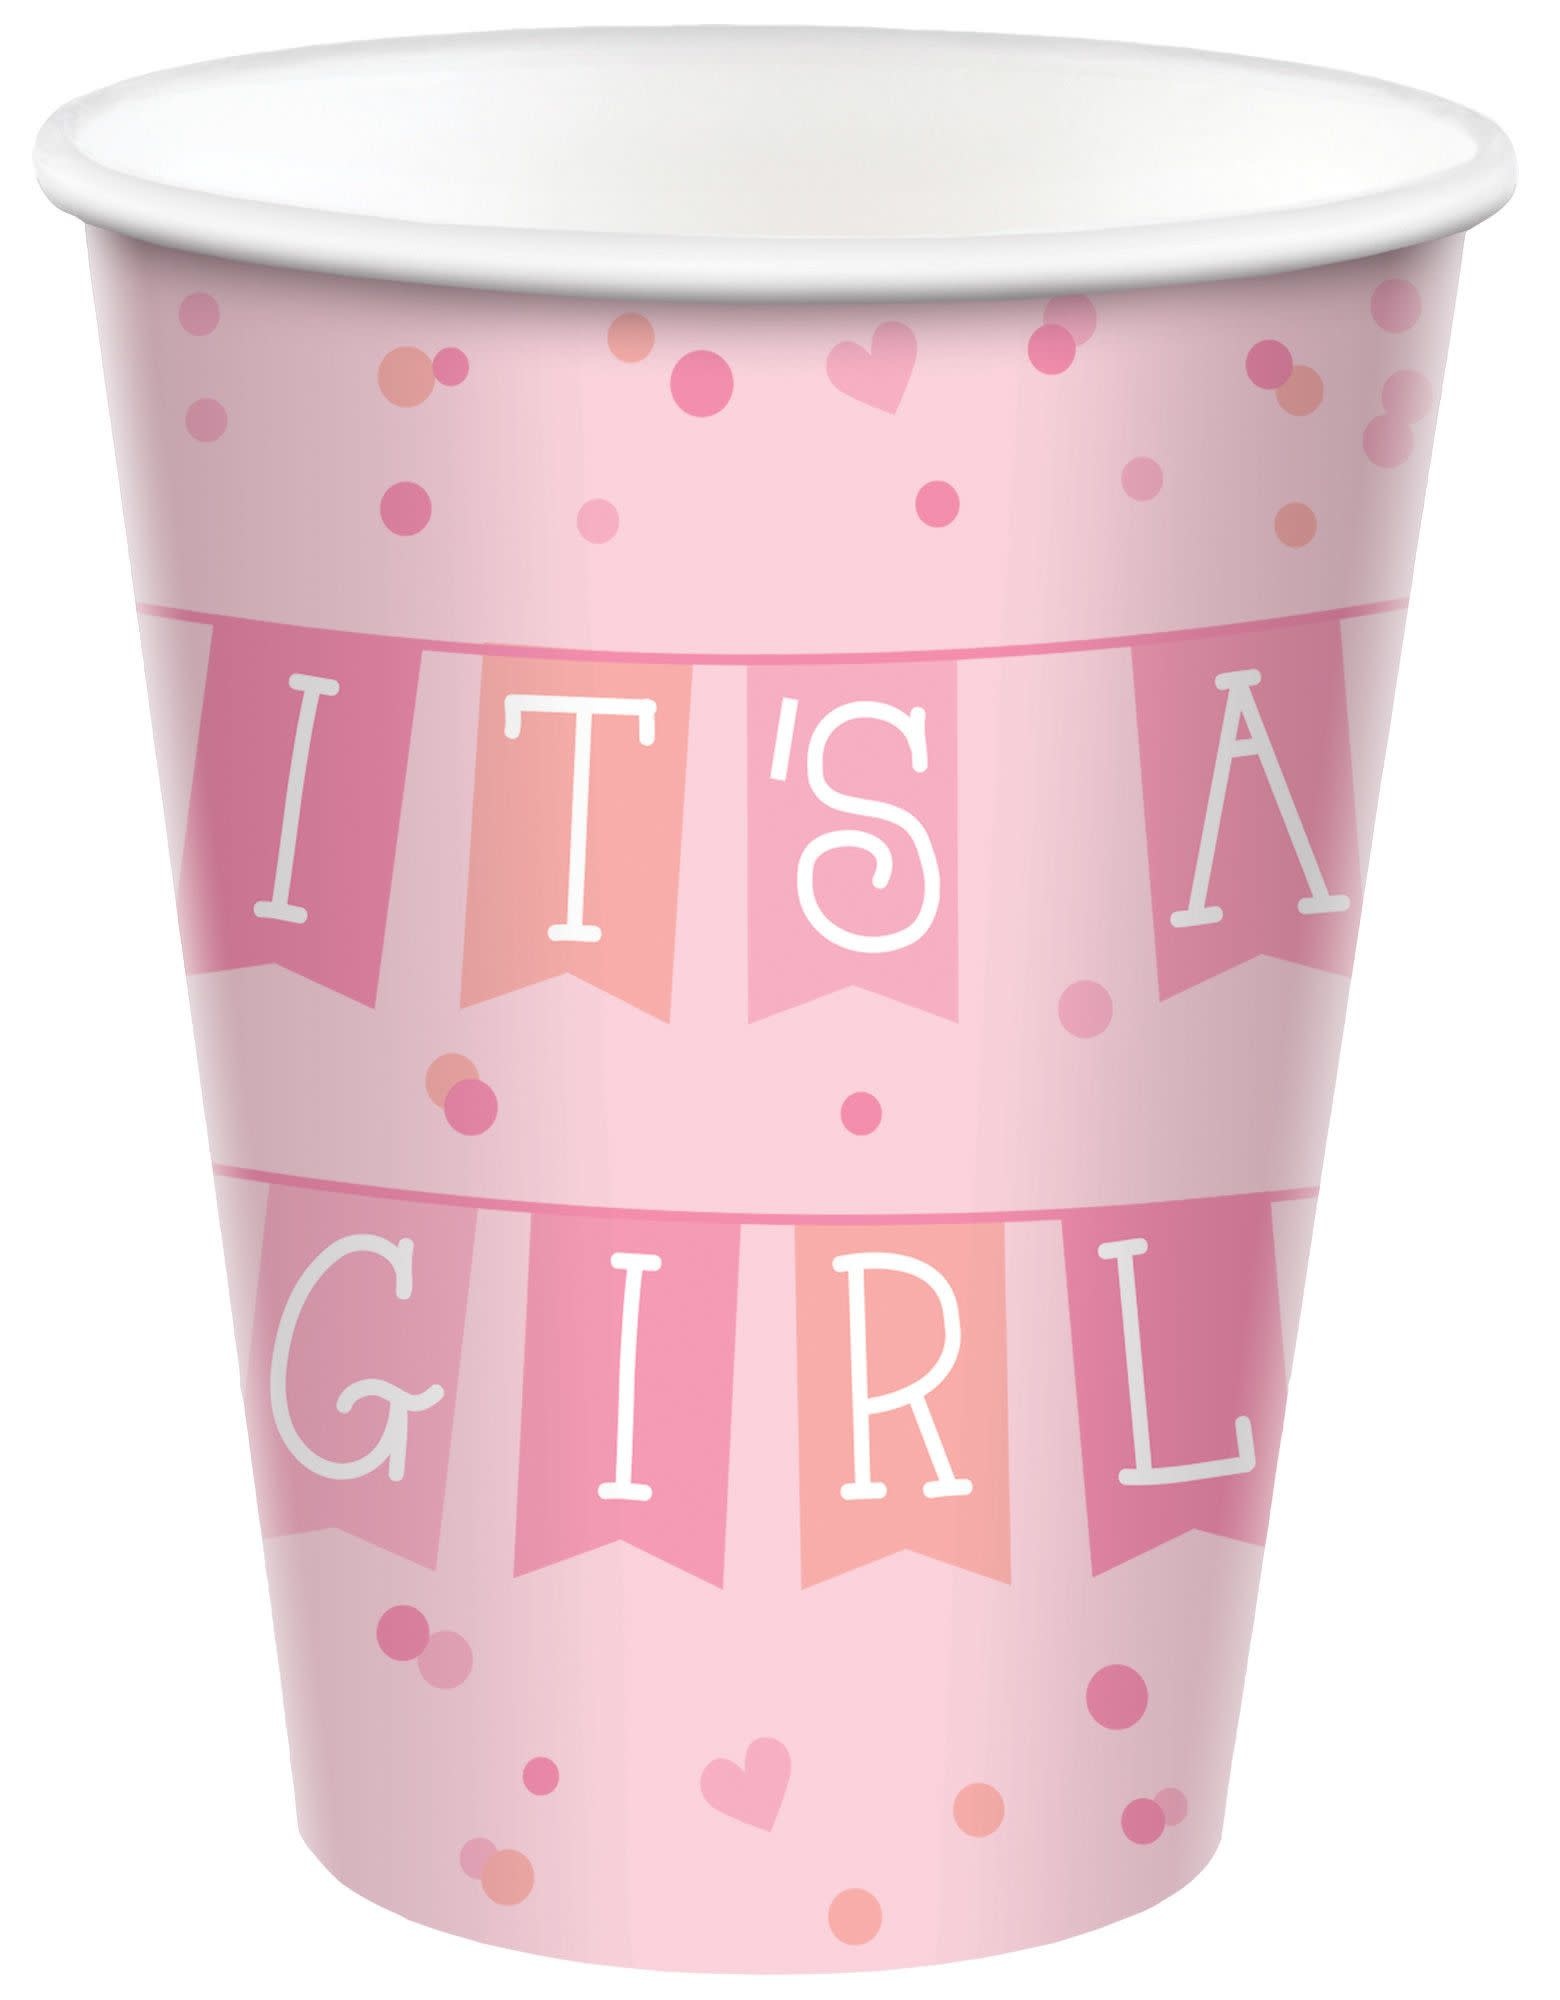 It's Girl 9 Oz Paper Cups